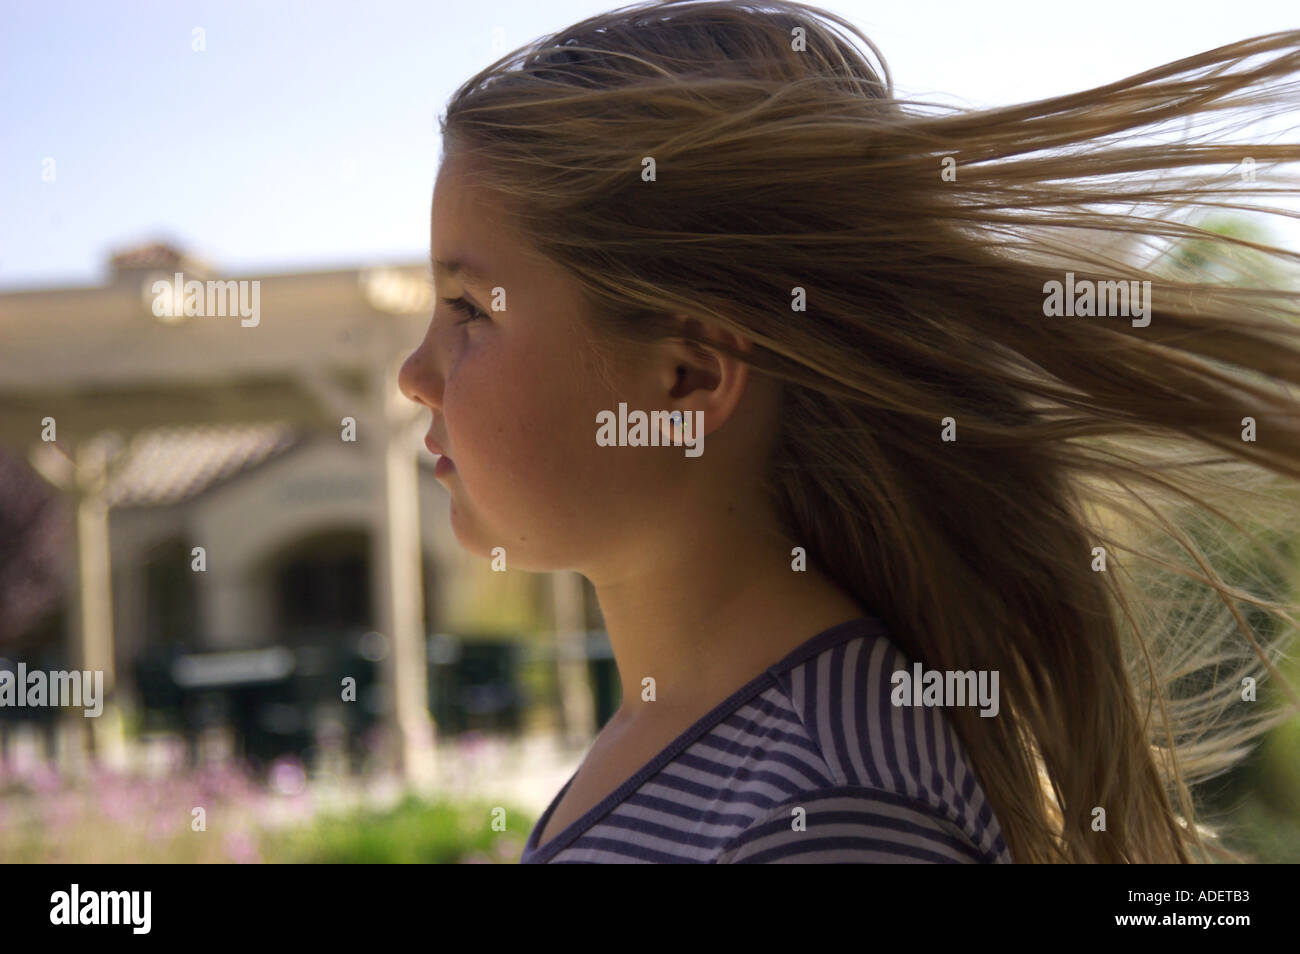 wind blowing in girl s hair Stock Photo